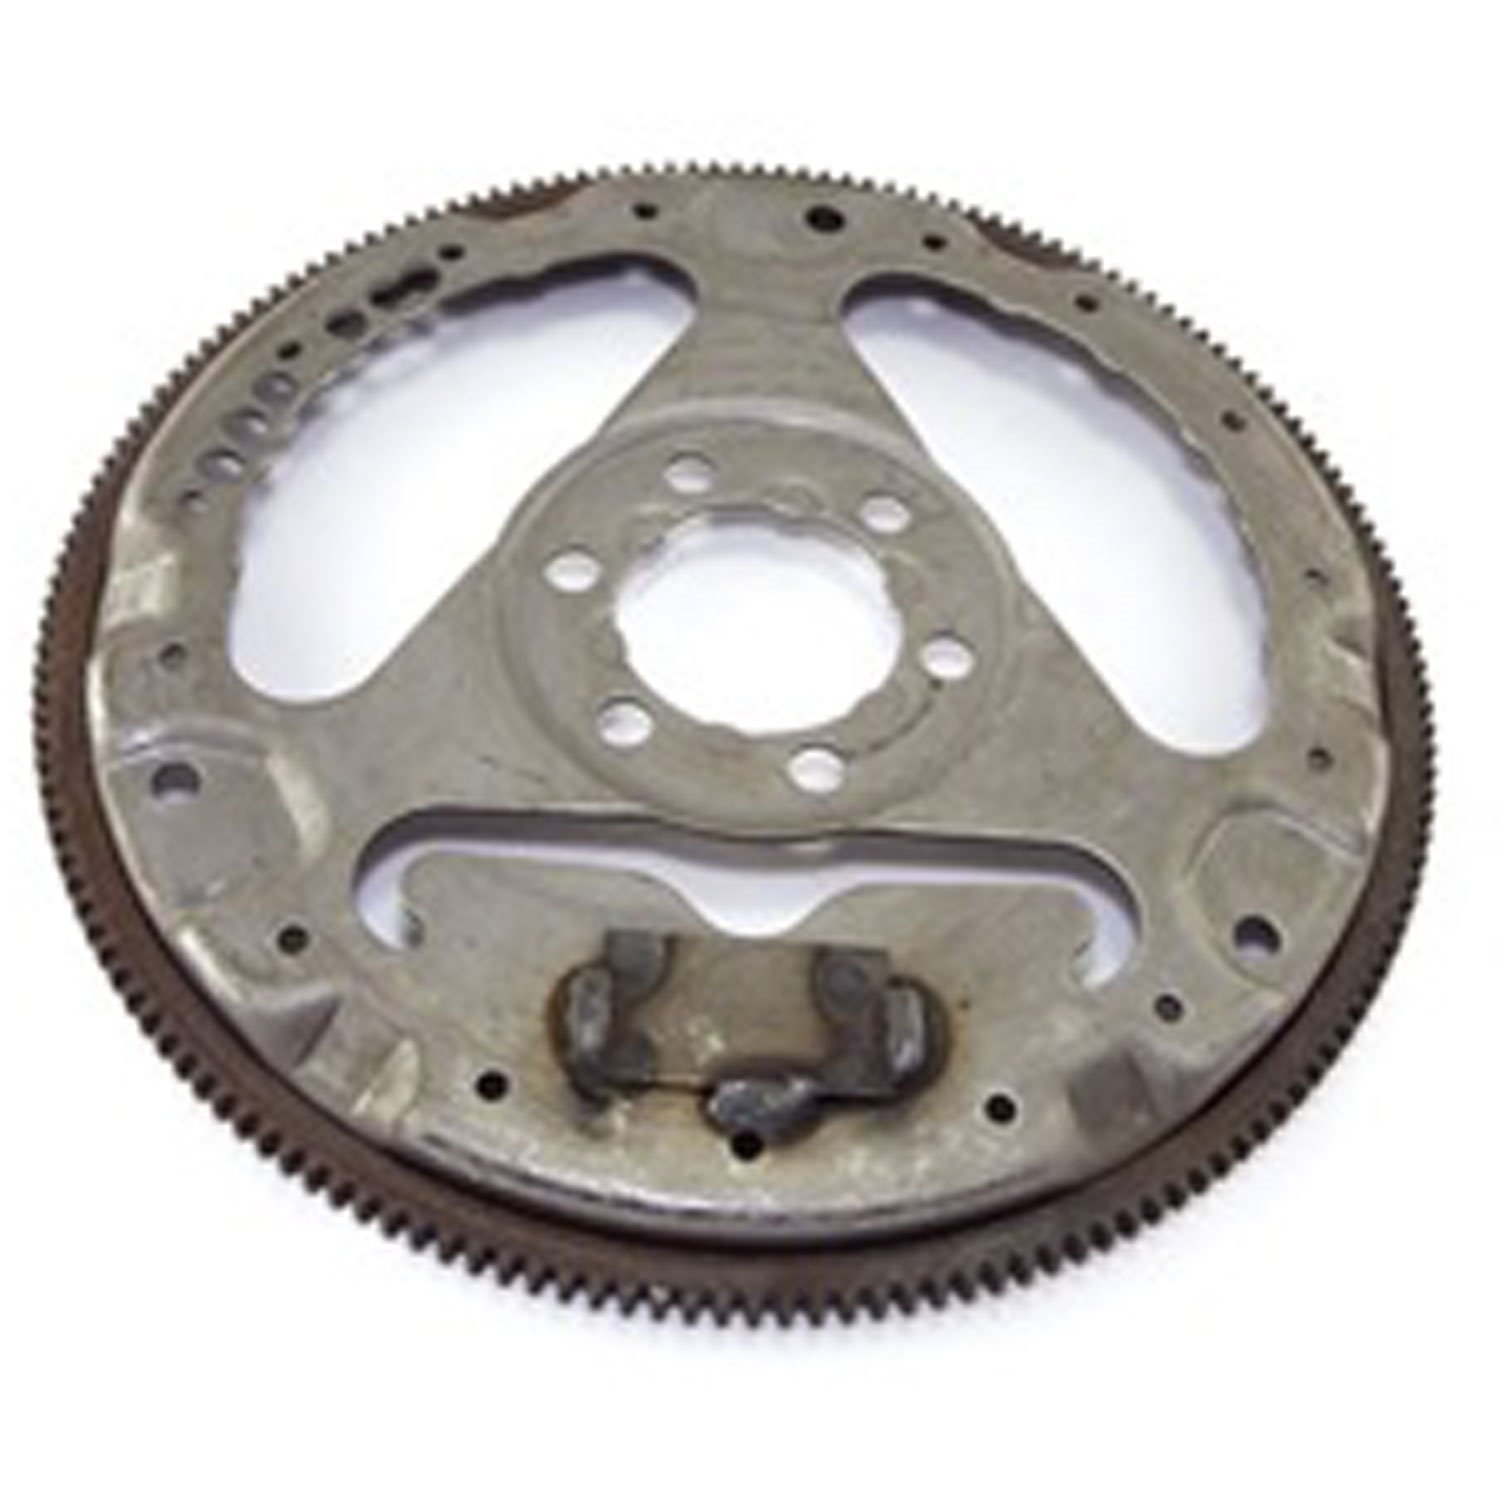 This automatic transmission flexplate from Omix-ADA fits 76-78 Jeep SJ Cherokees and Wagoneers with a 401 cubic inch V8 engine.